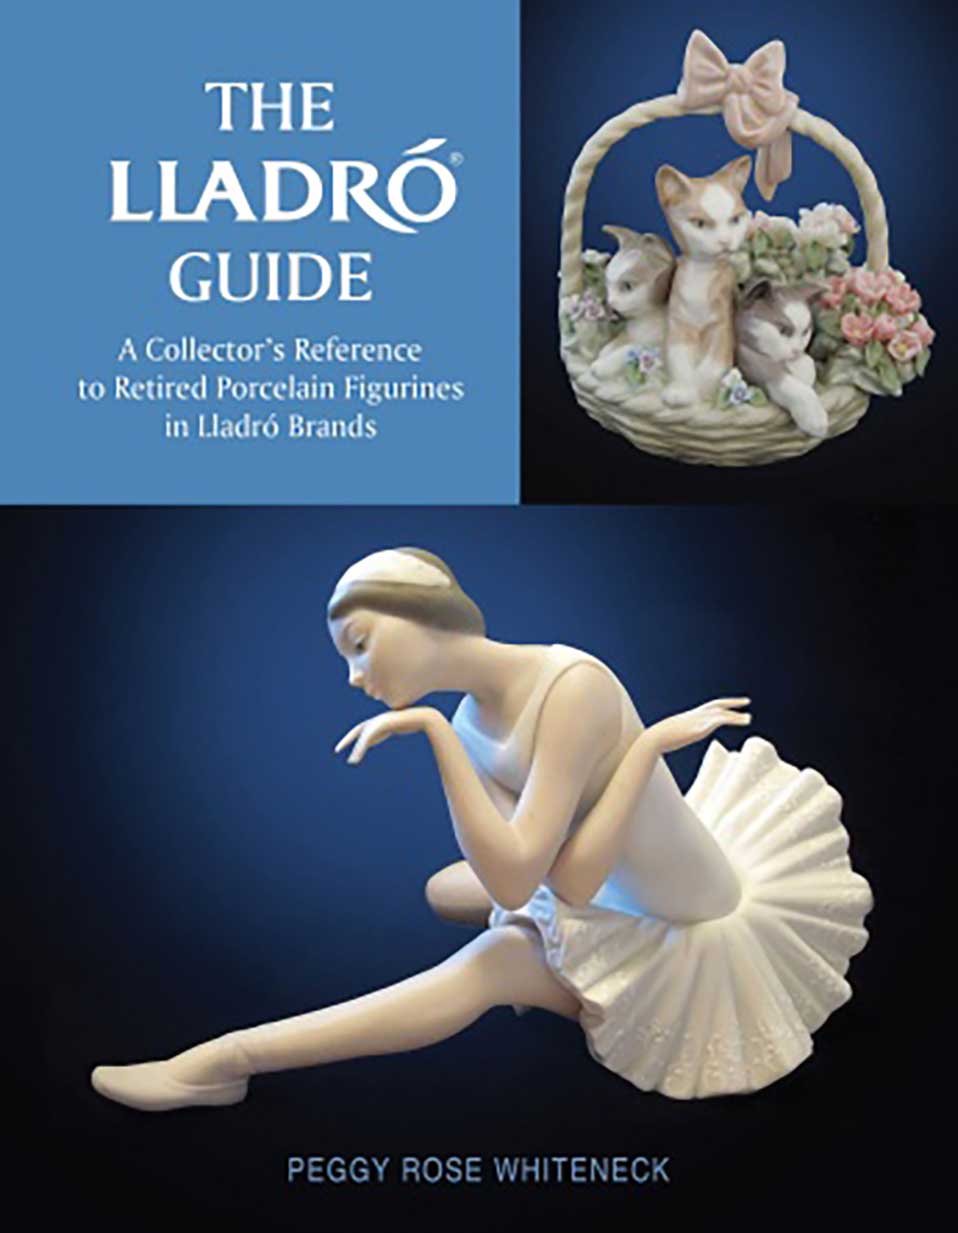 My latest hard-cover book on Lladró